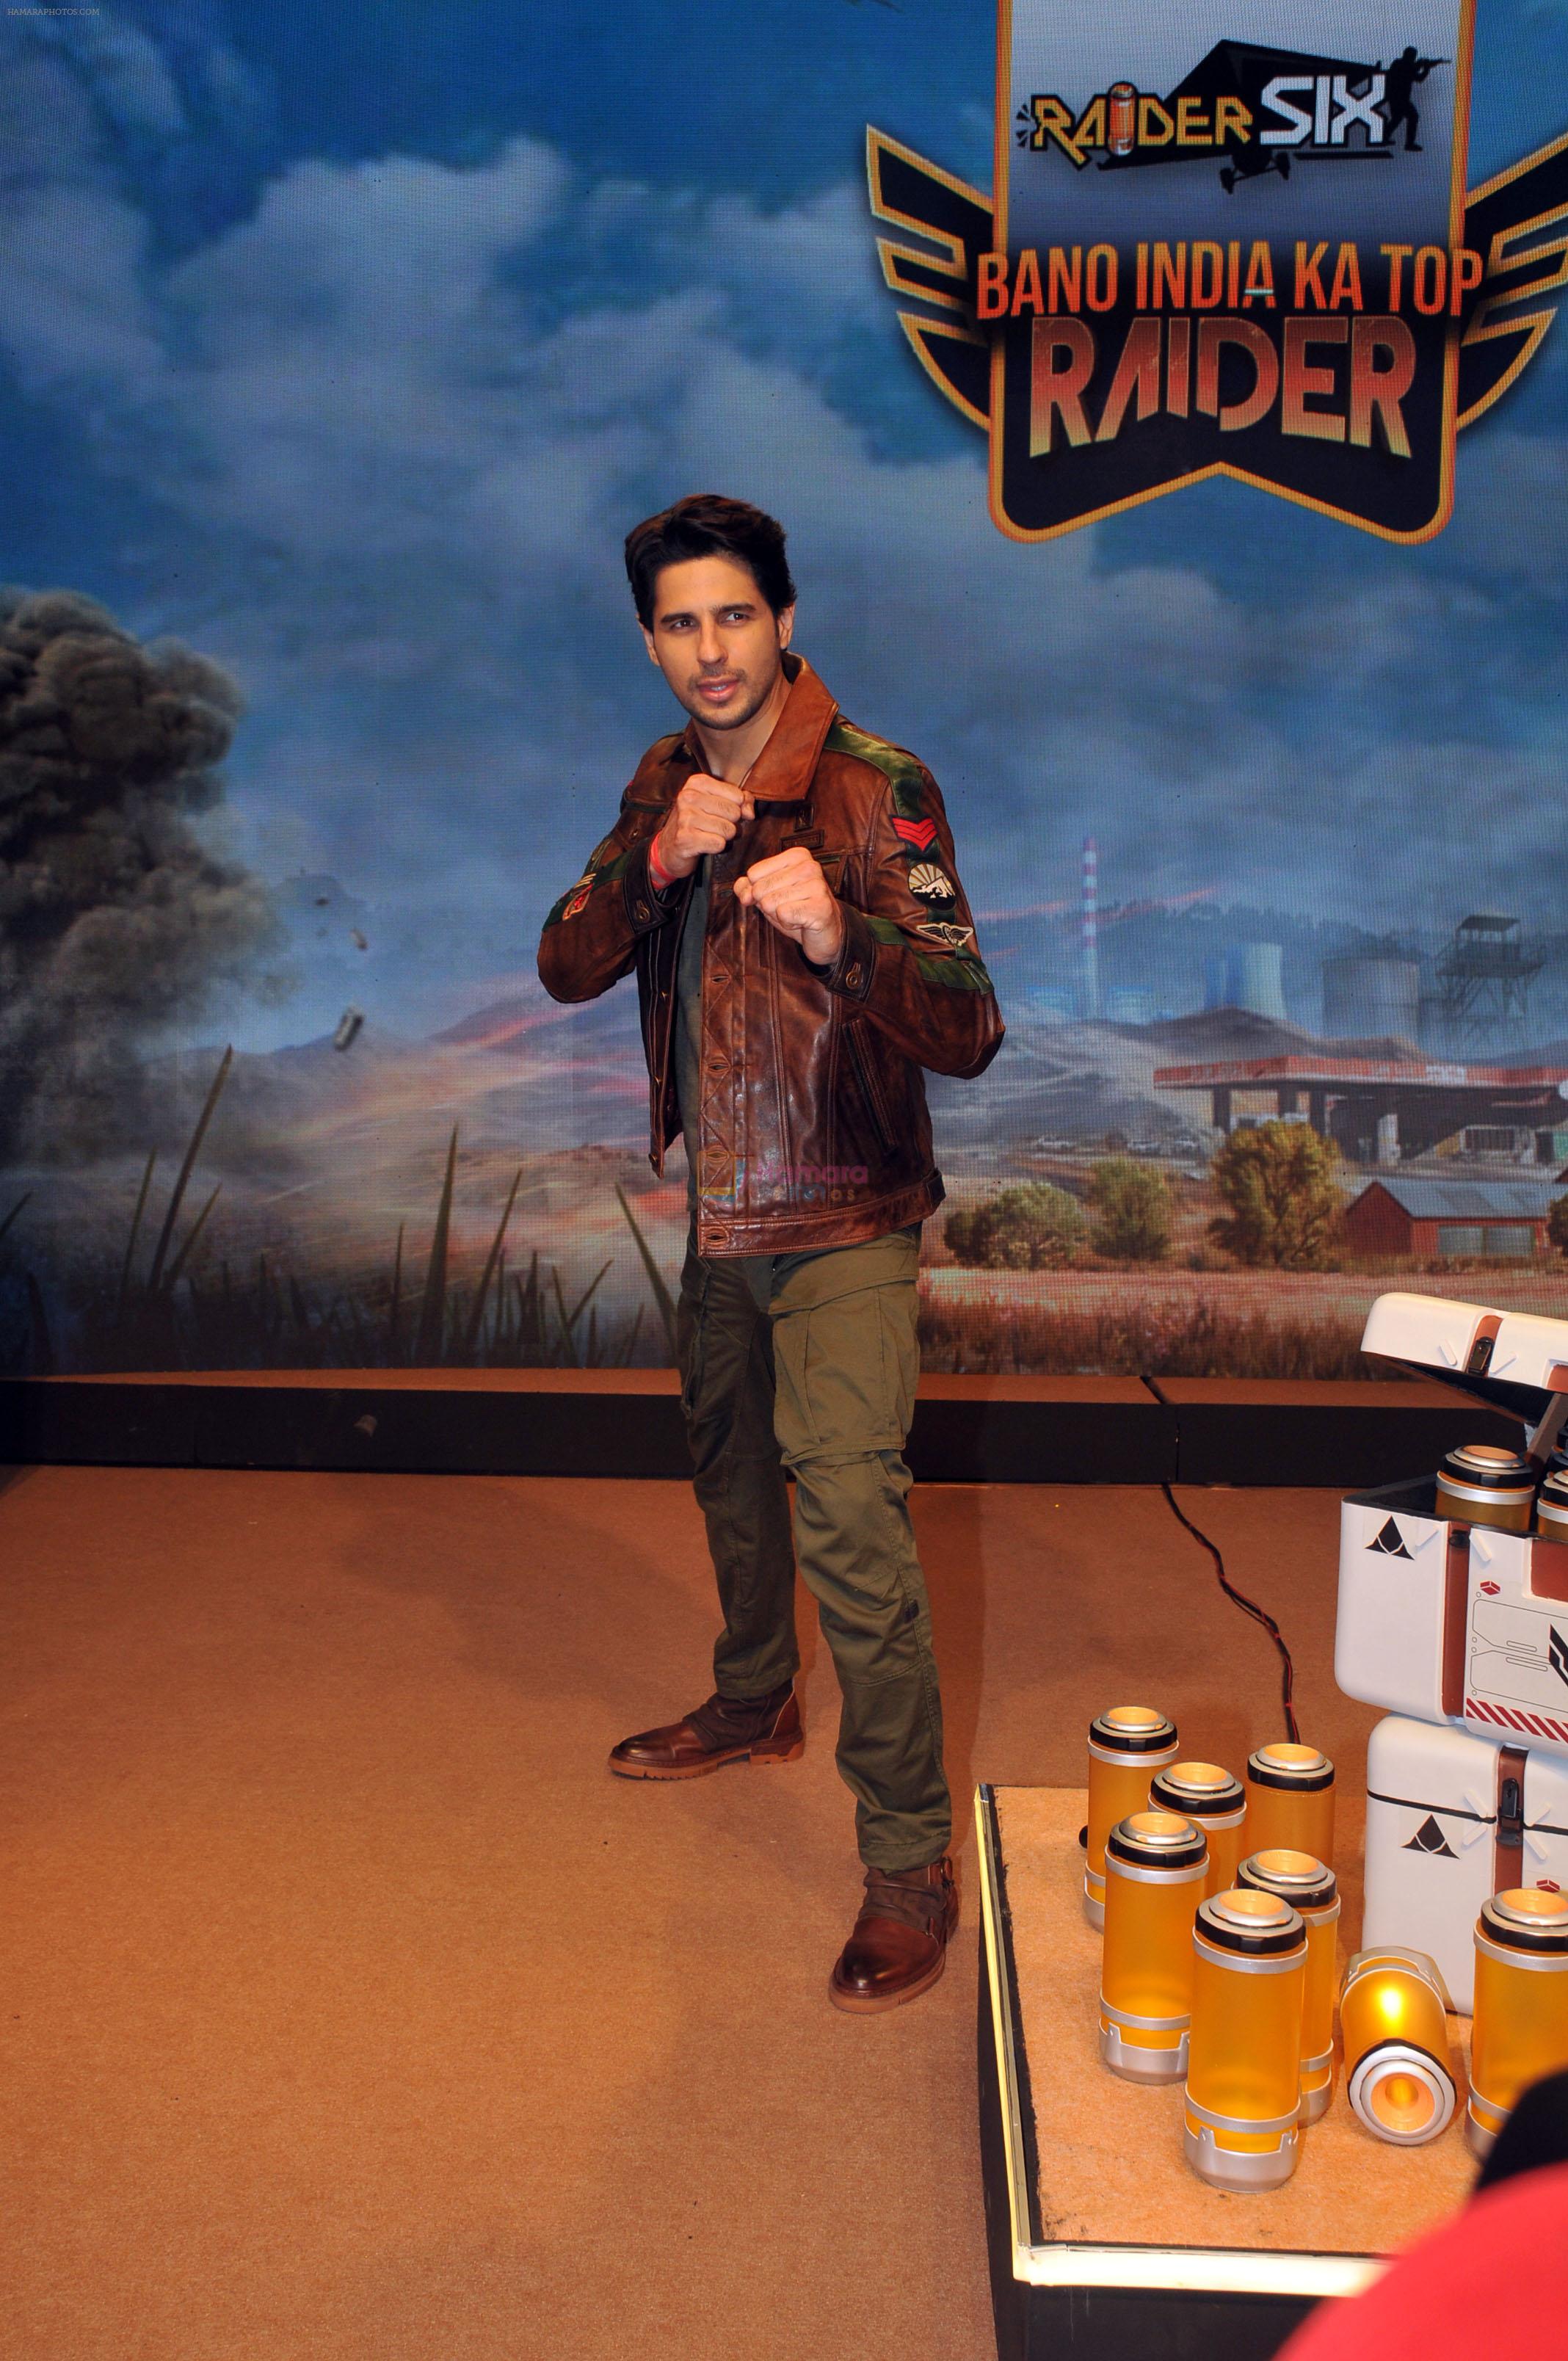 Sidharth Malhotra attends the launch of new Battle Royale game Raider Six on 11 July 2023